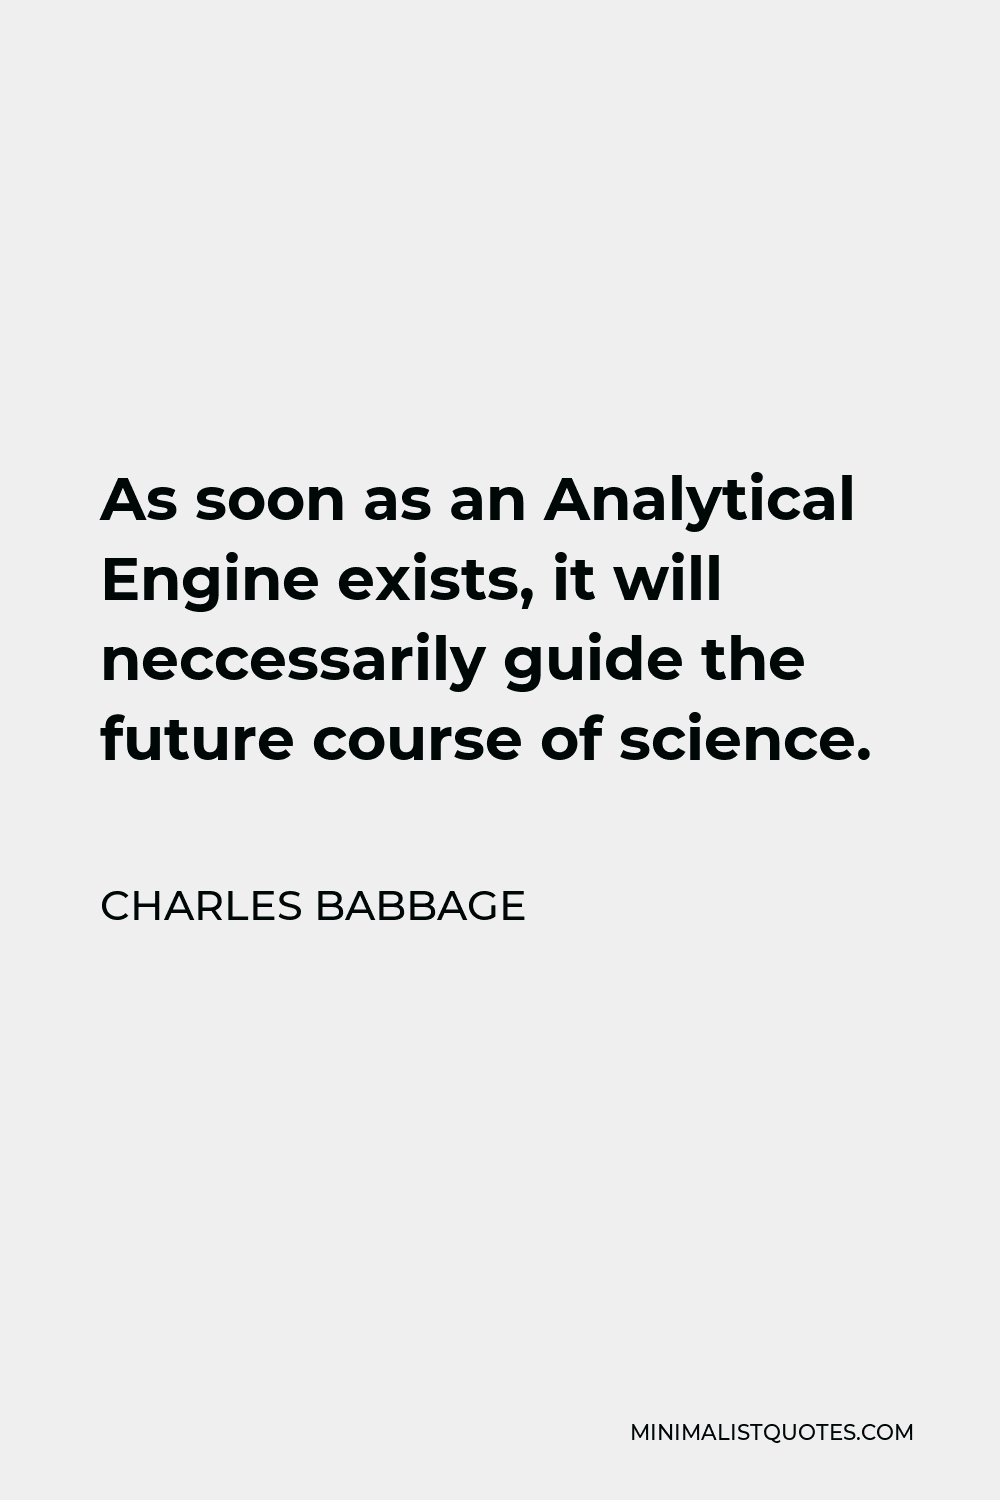 Charles Babbage Quote - As soon as an Analytical Engine exists, it will neccessarily guide the future course of science.